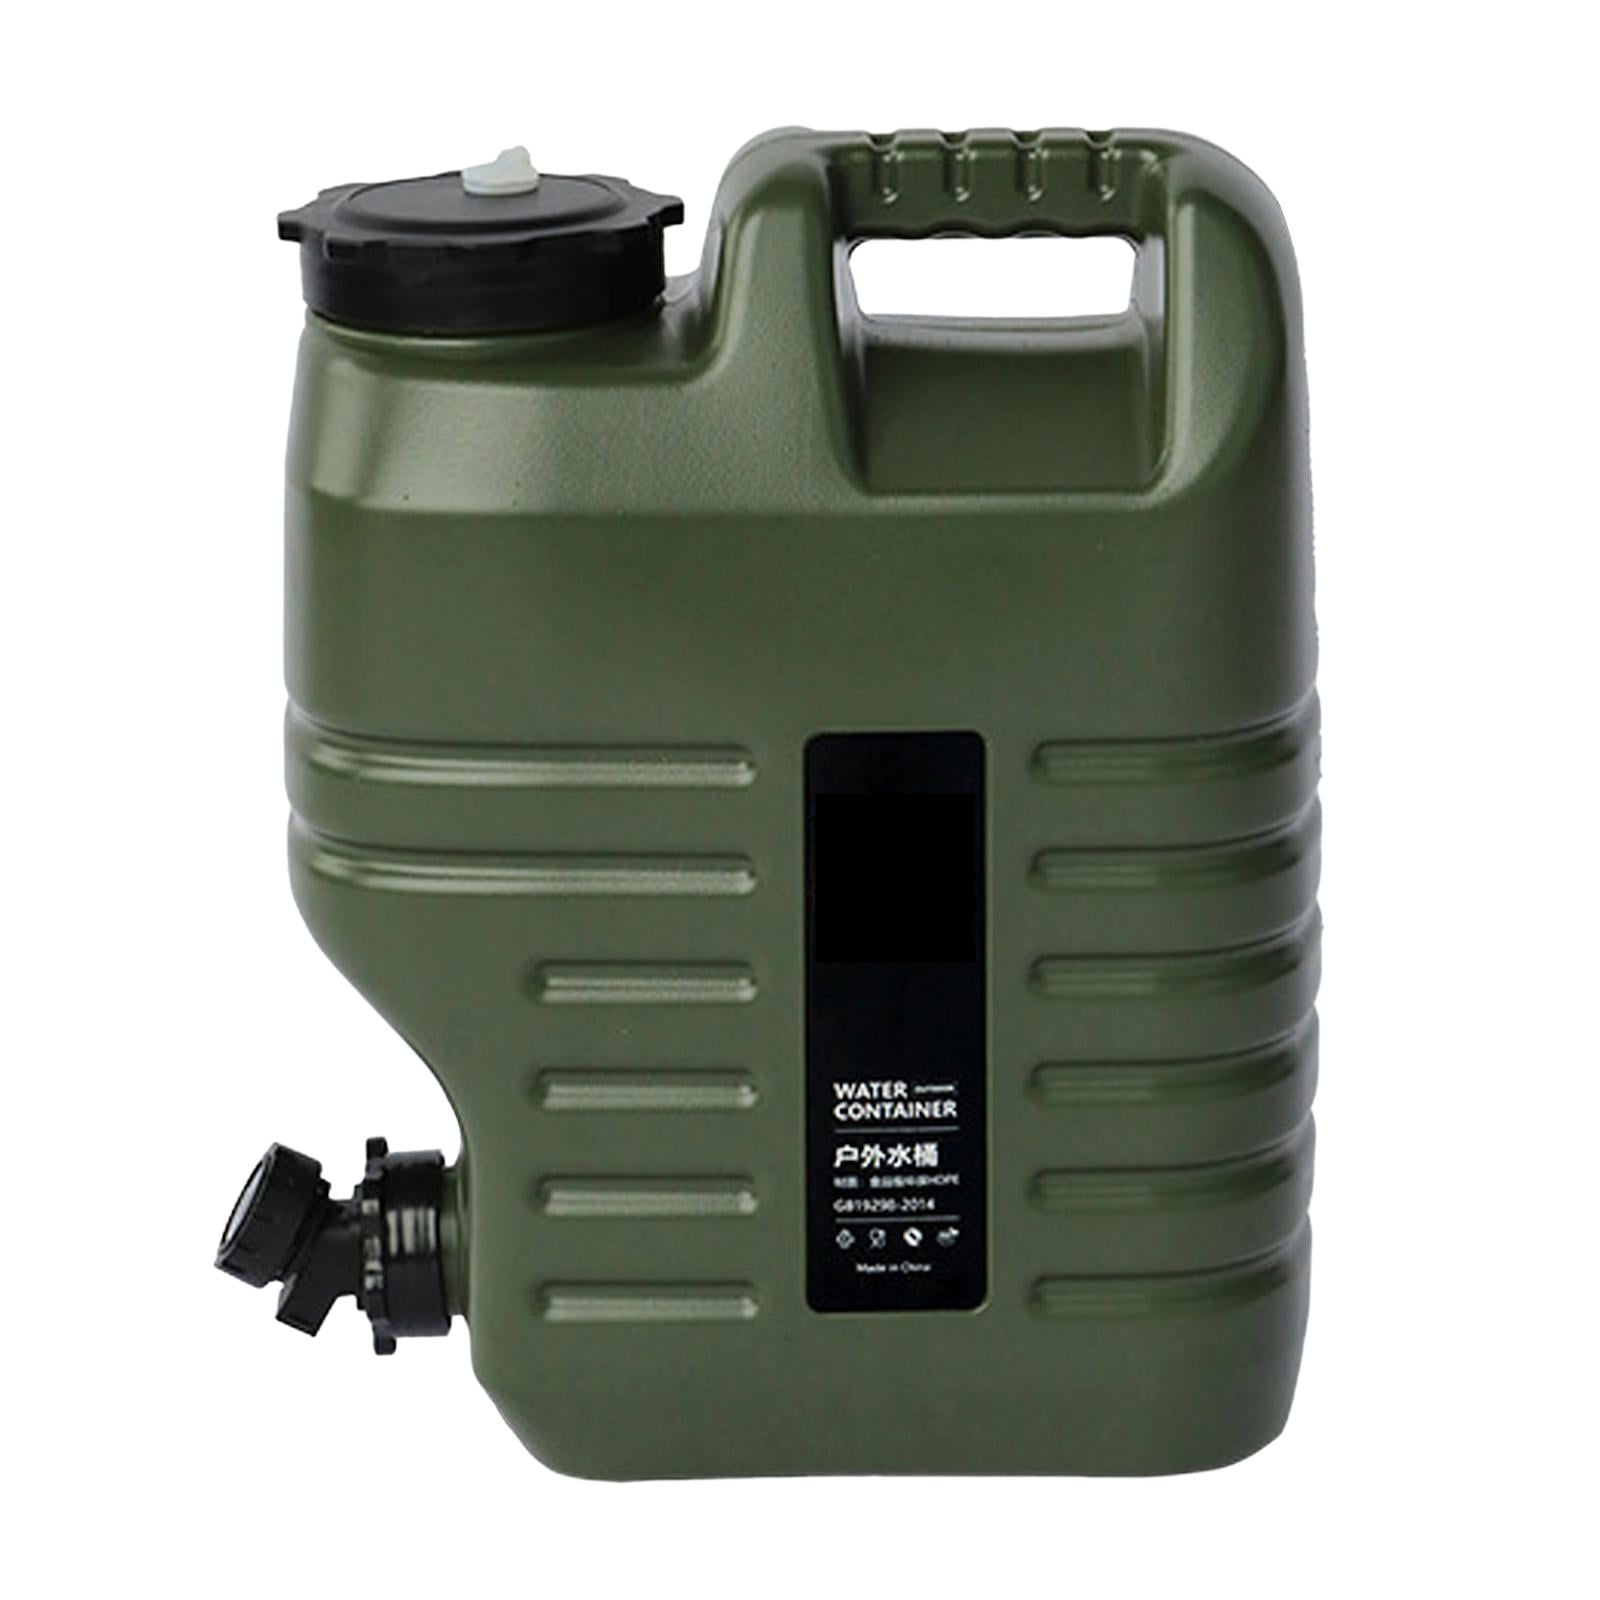 Digury 5 Gallon Water Jug, Camping Water Container BPA Free Water Storage  with Spigot No Leakage Portable Emergency Water Tank for Outdoor Hiking  Camping Picnic Supplies Green